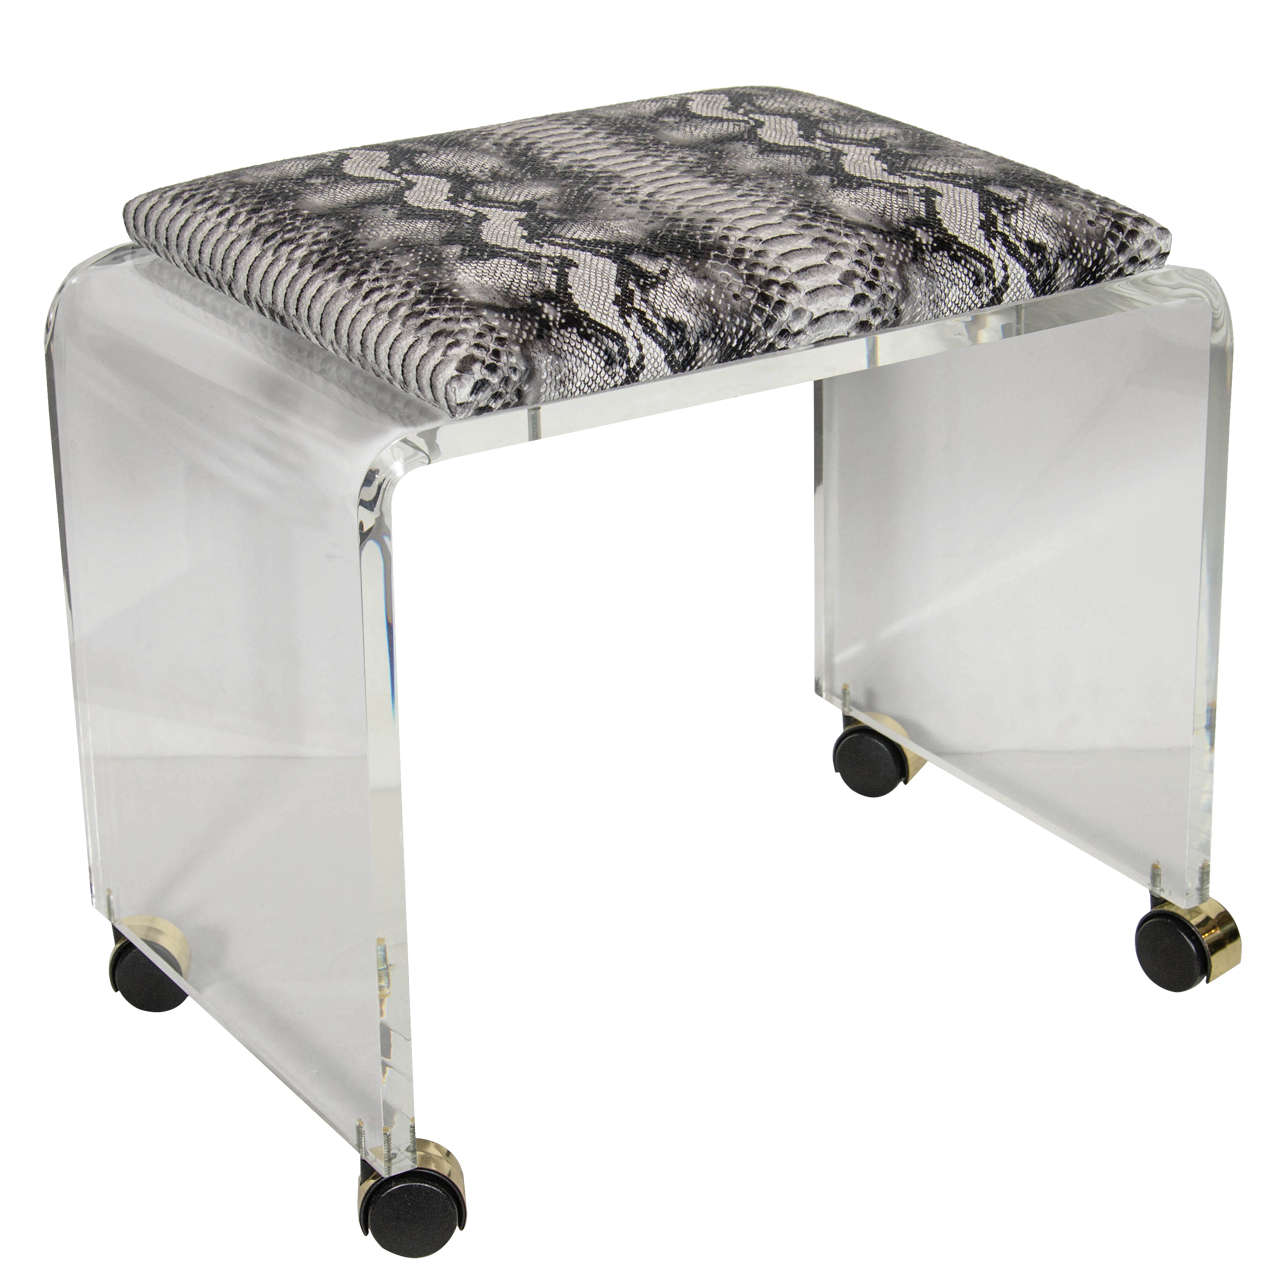 Mid-Century Modernist Waterfall Form Lucite Stool with Faux Python Upholstery